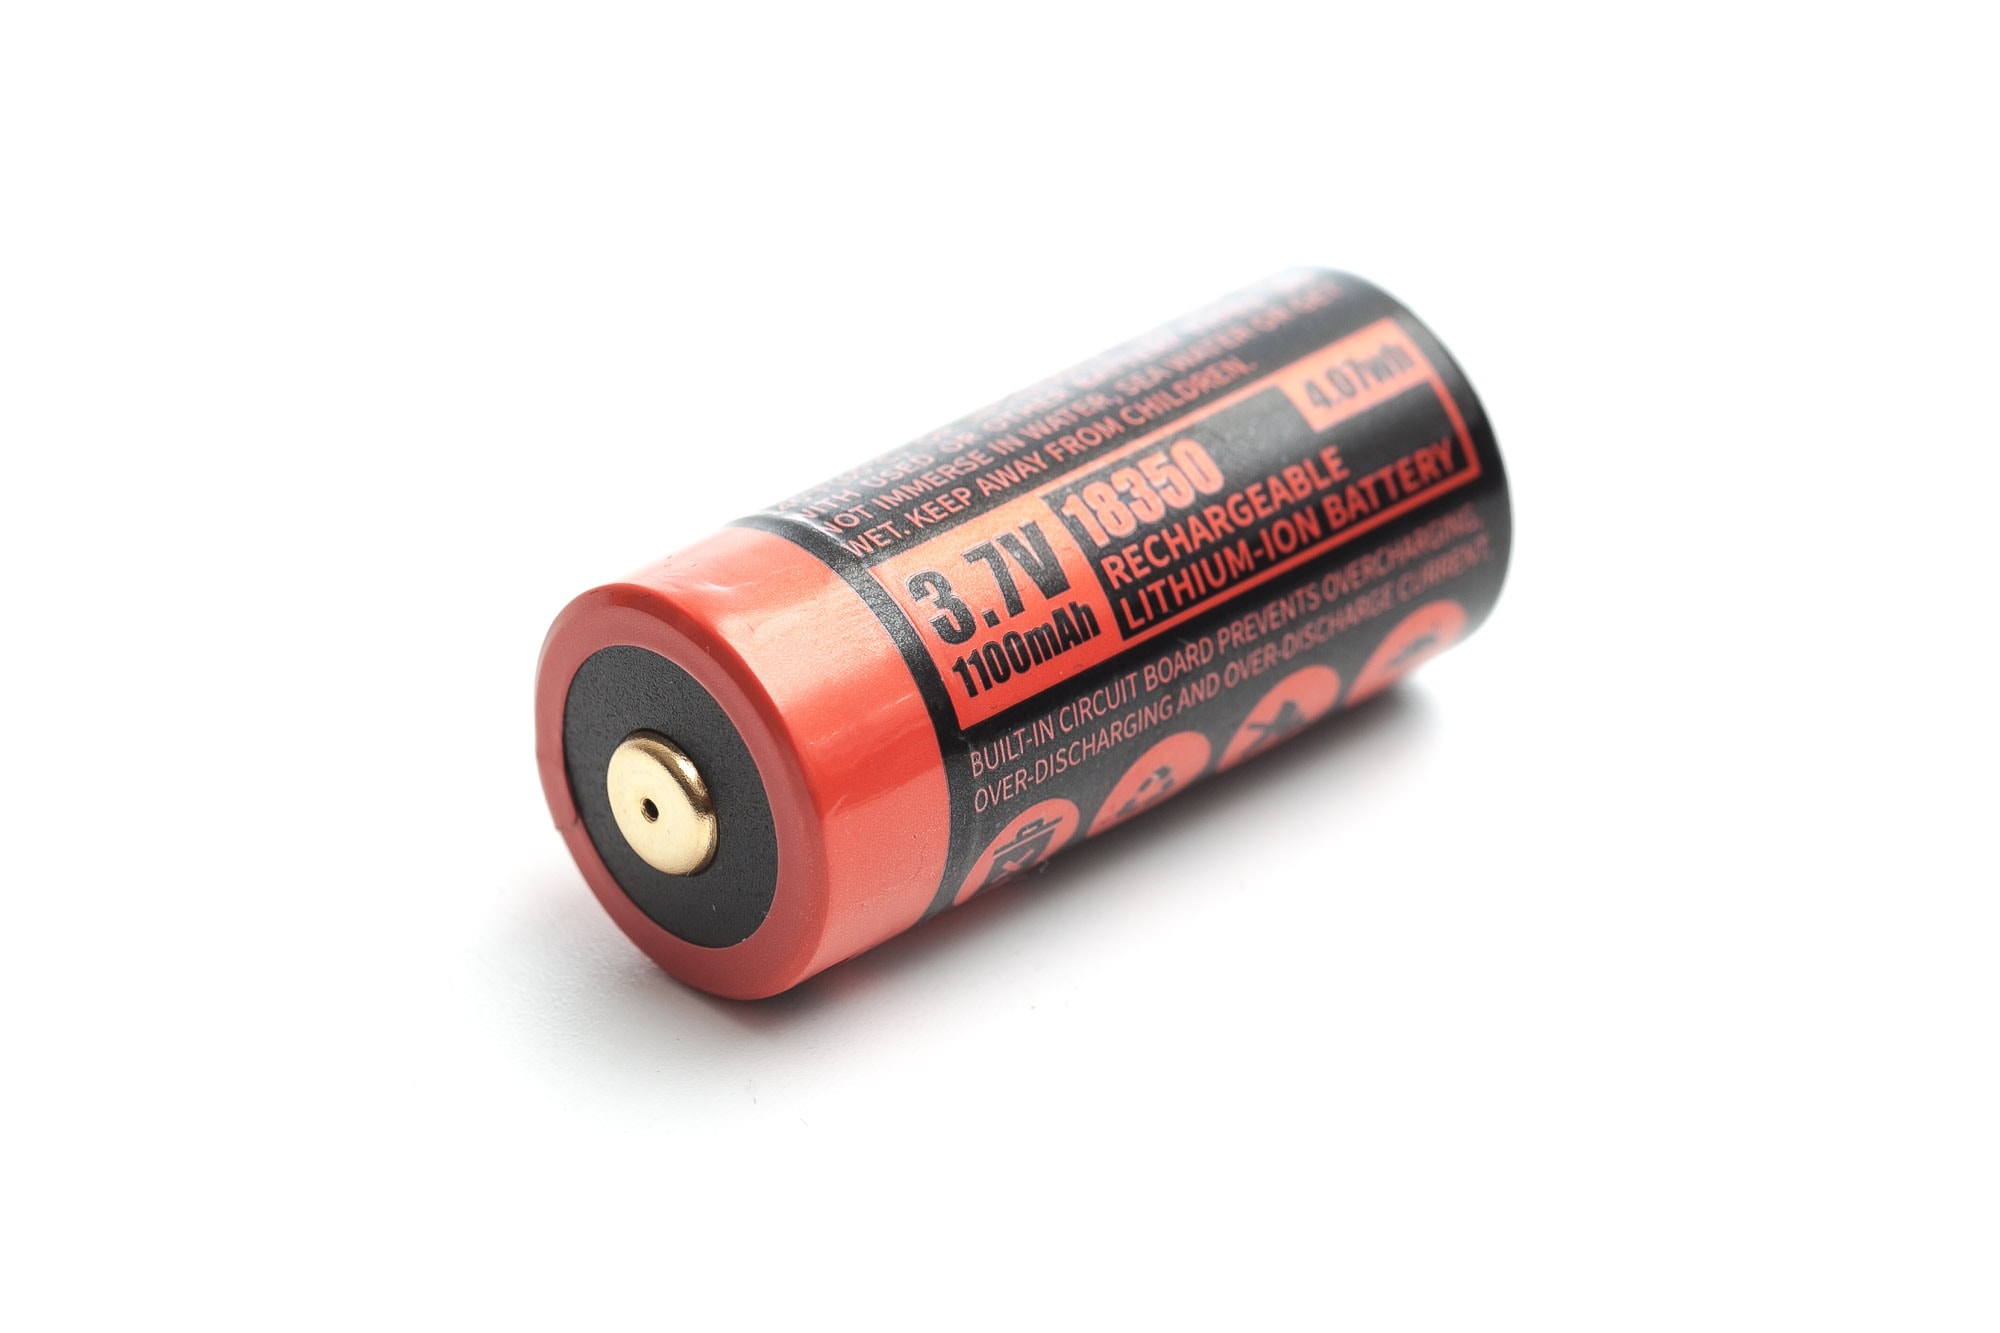 vosteed rook 18350 battery positive